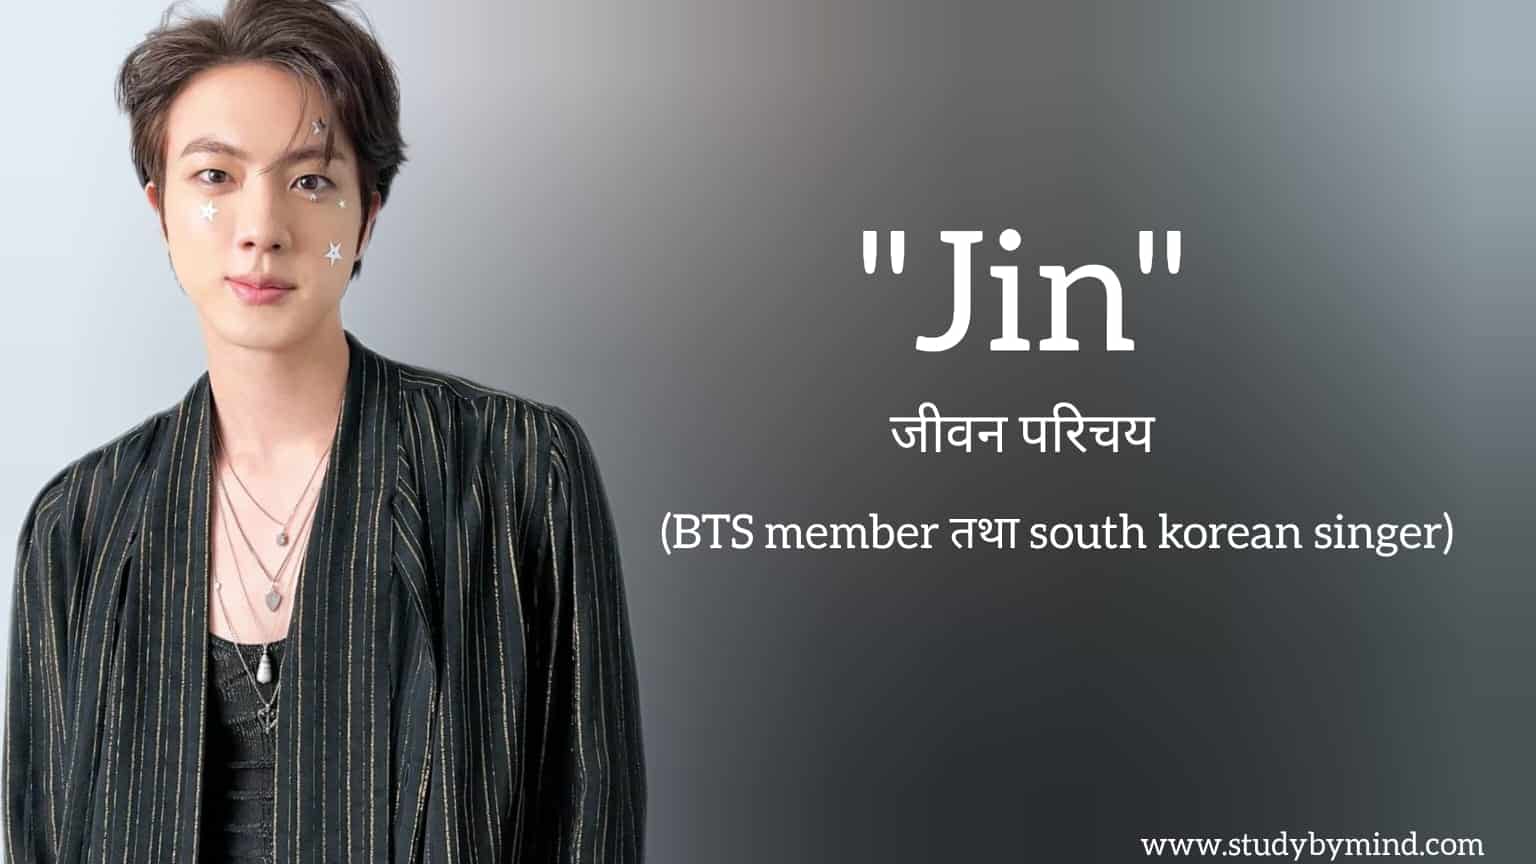 You are currently viewing जिन जीवन परिचय Jin biography in hindi (BTS Member तथा south korean singer, Songwriter)